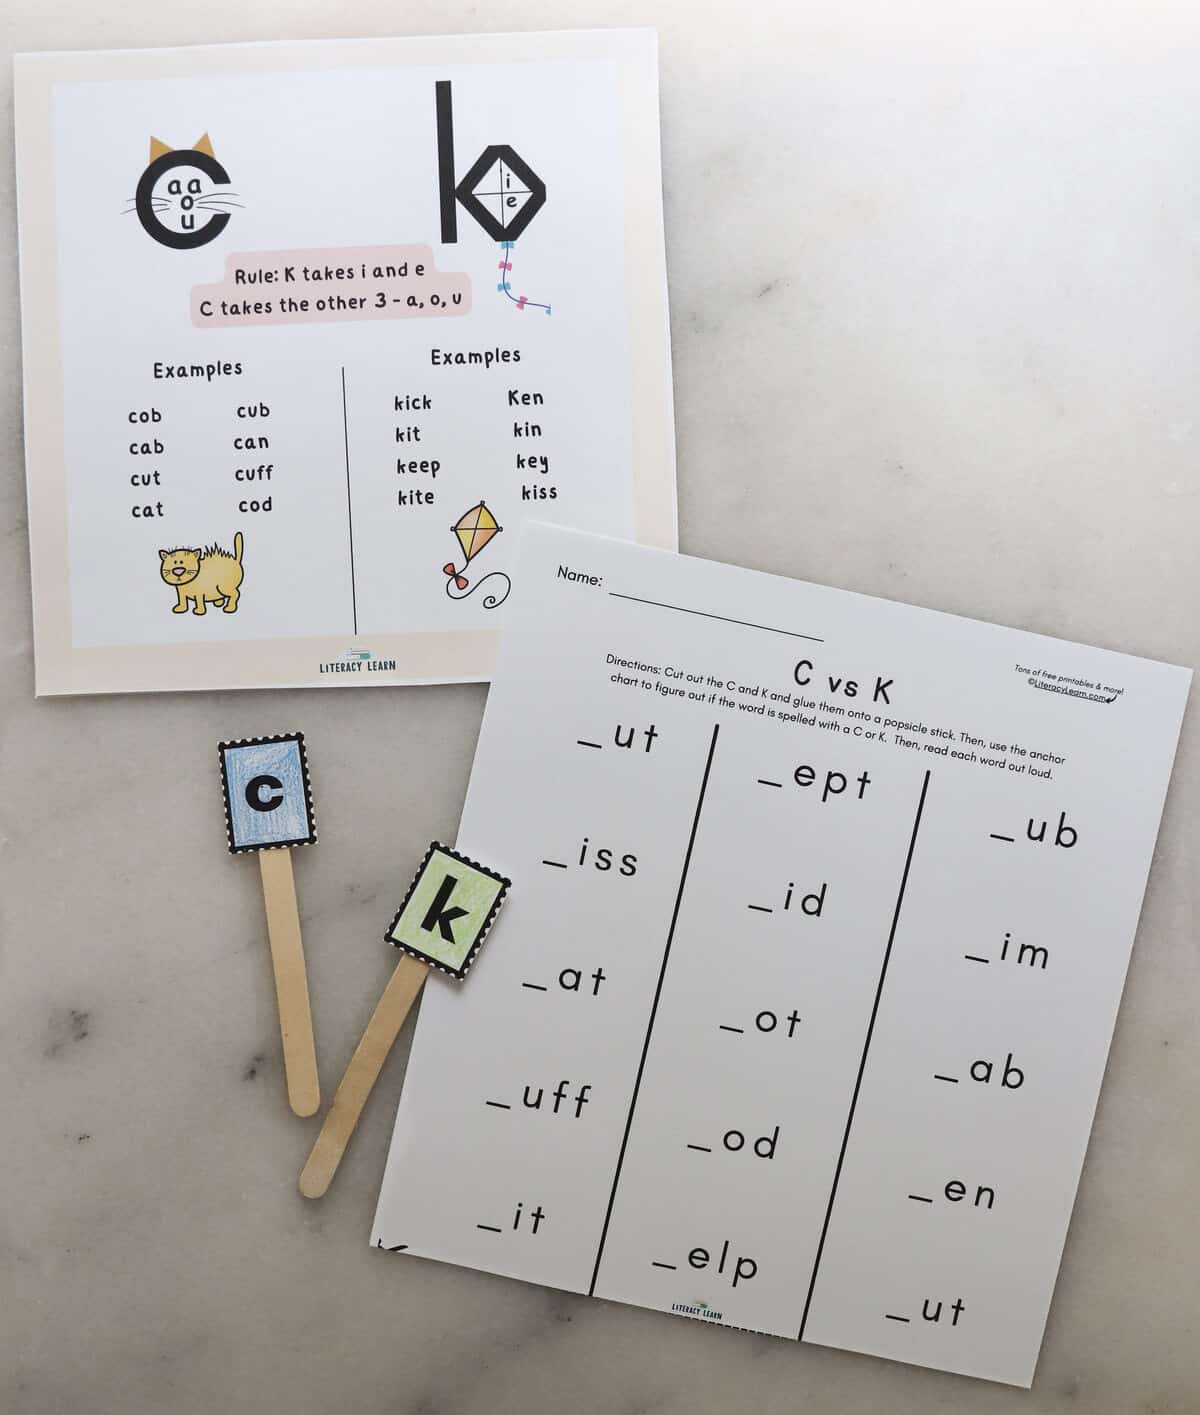 Photograph of the C vs. K anchor chart and C vs K worksheet.